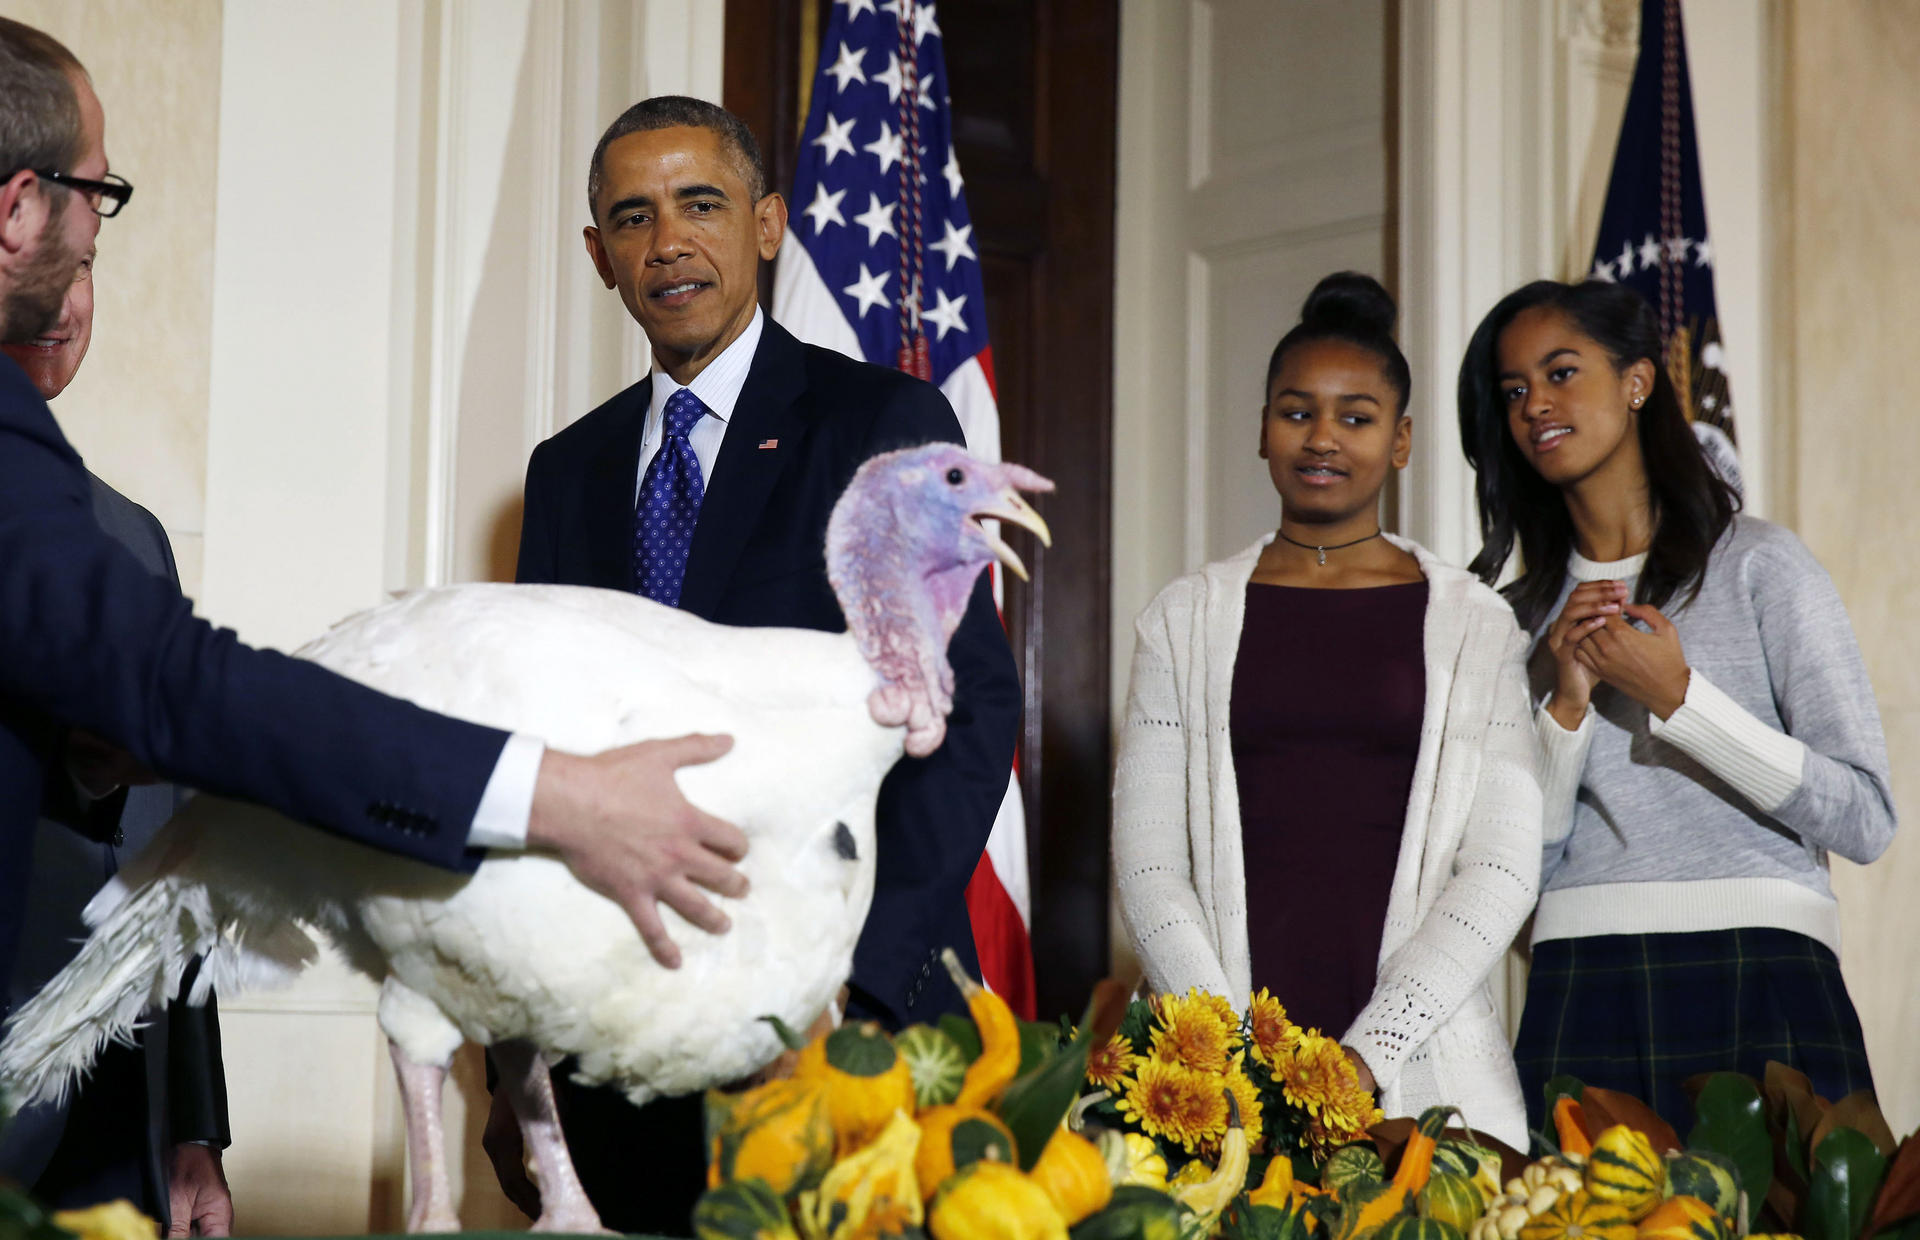 Barack Obama is joined by daughters Sasha and Malia (right) at the pardoning ceremony. Photo: Reuters